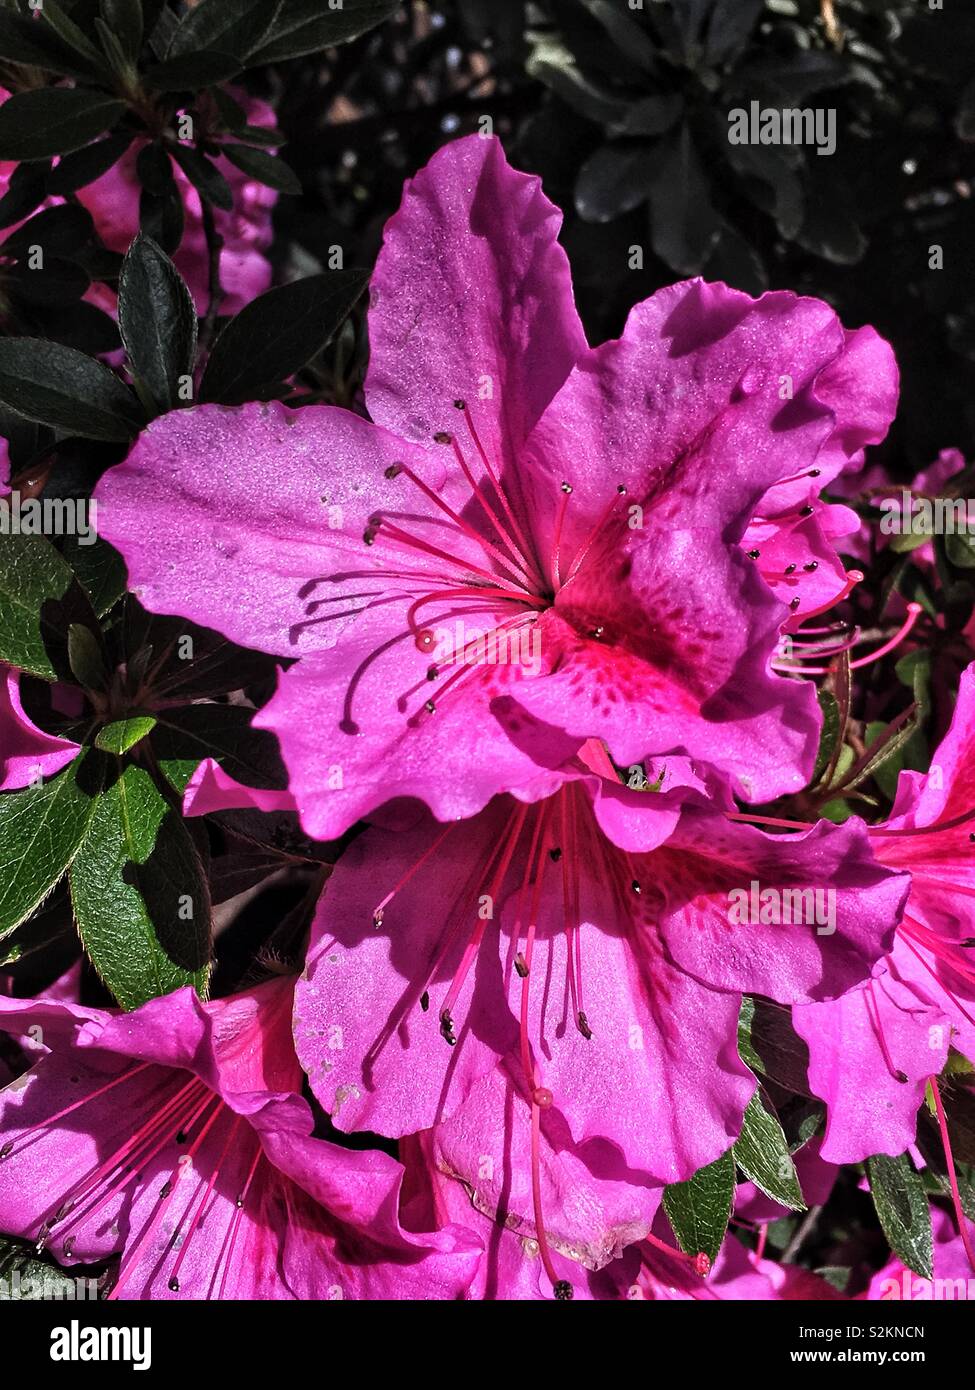 Closeup of a perfect choice hot pink azalea flower in full bloom. Stock Photo